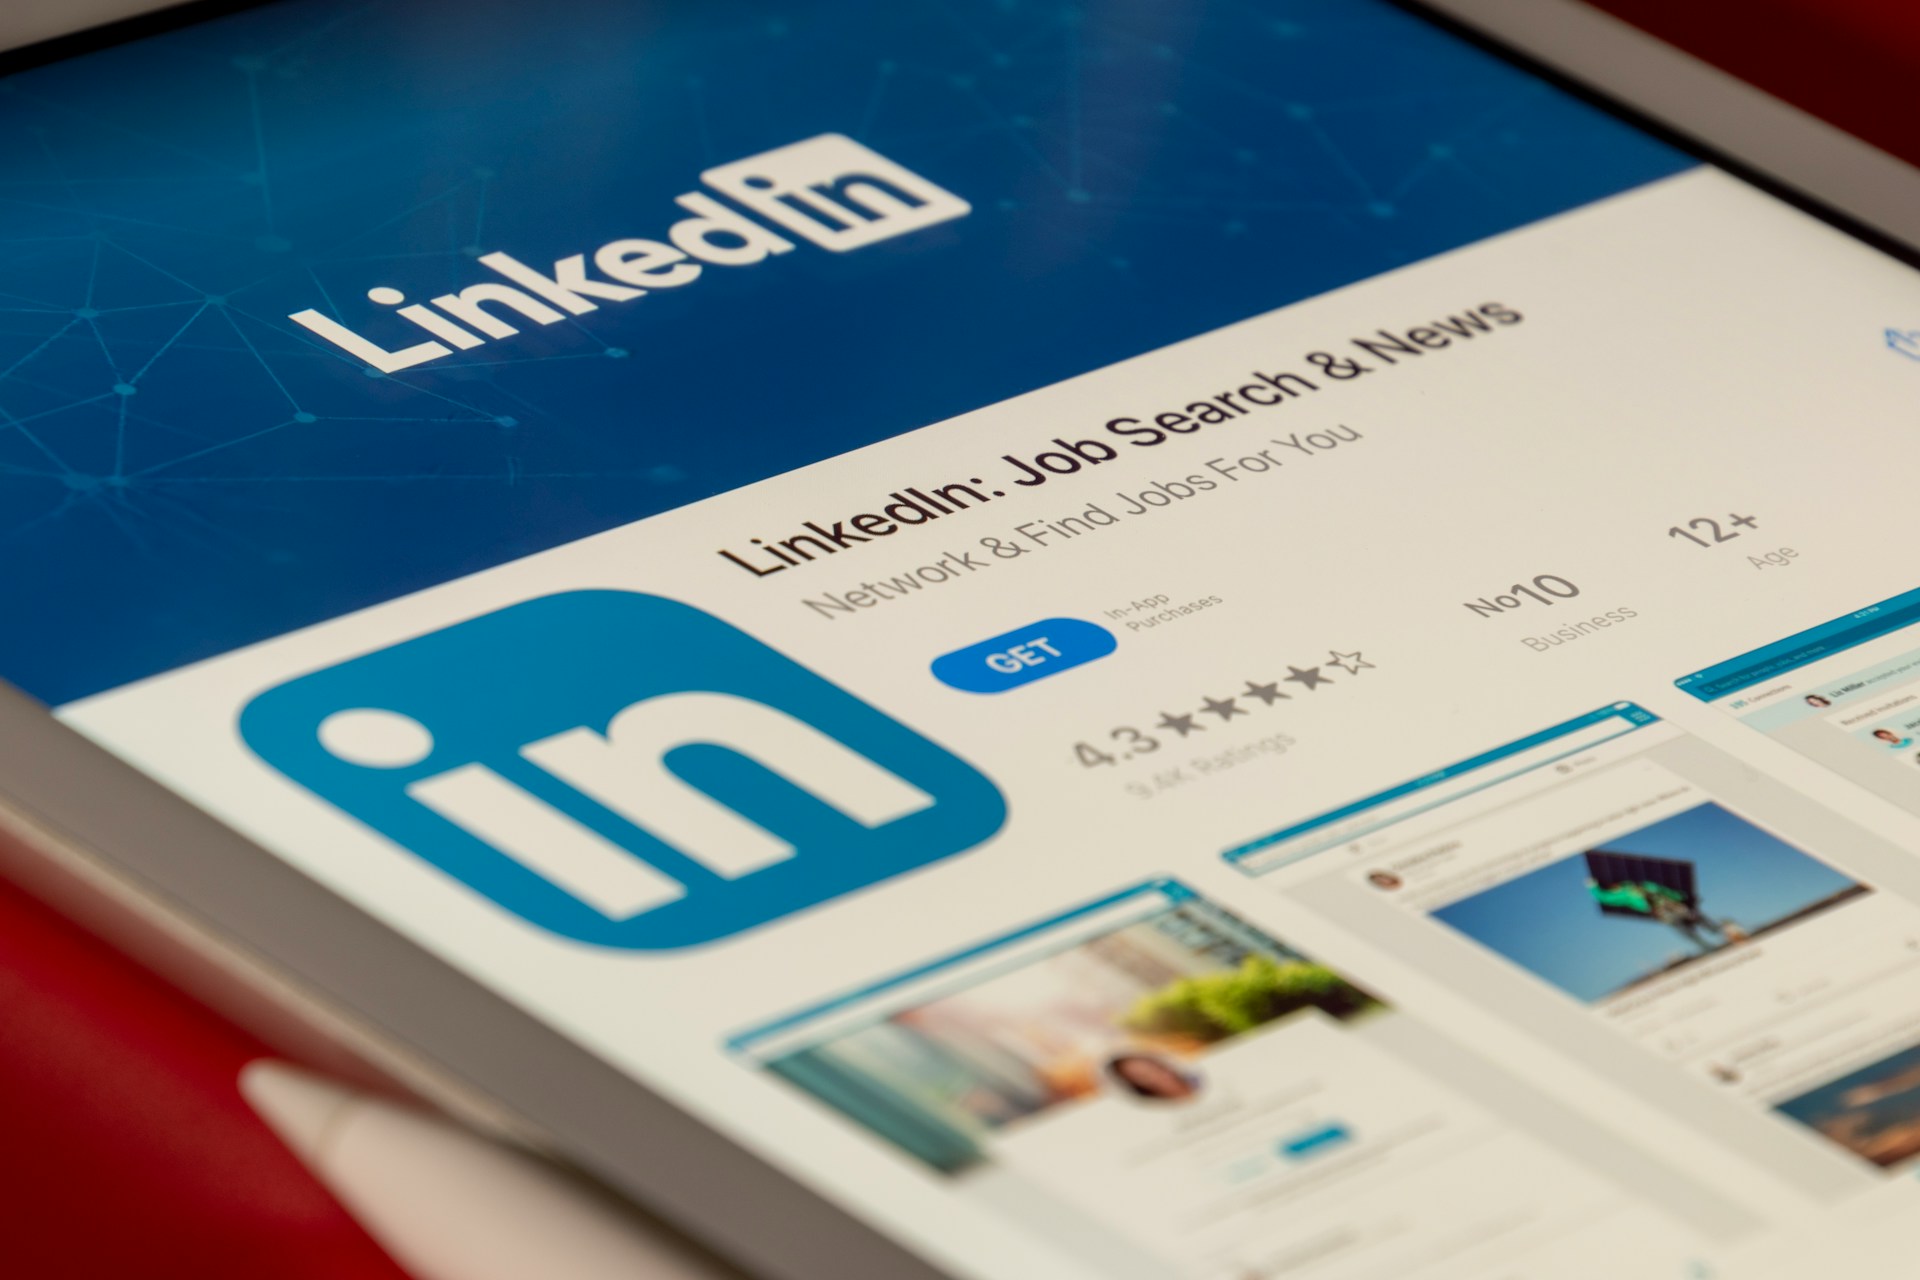 Mastering LinkedIn: 10 best practices for b2b marketing success